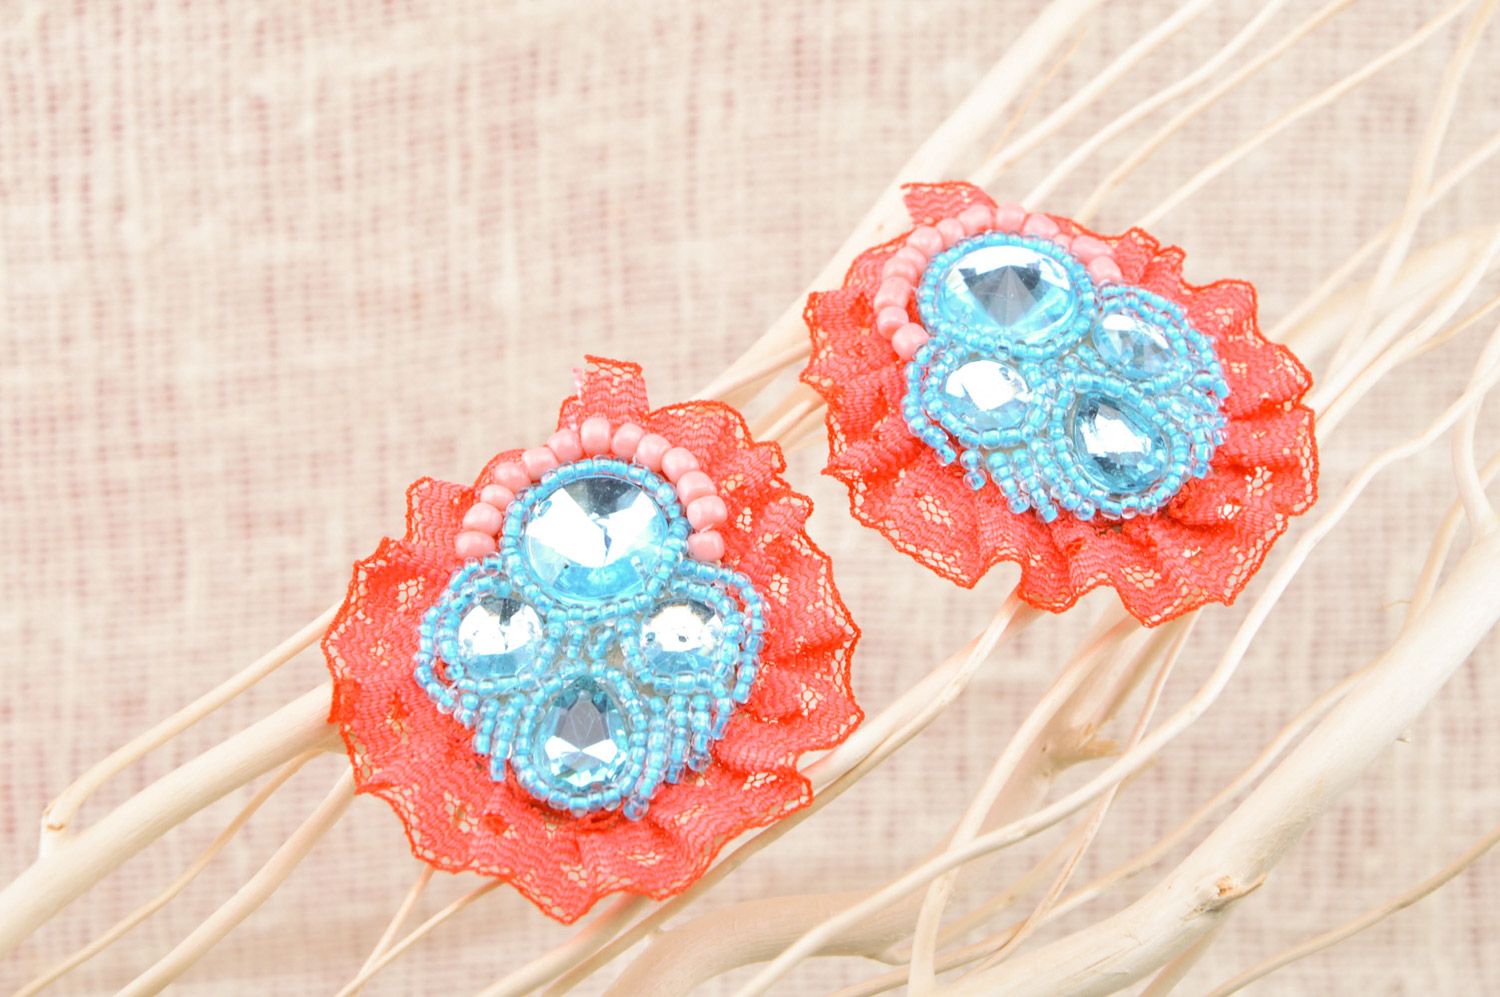 Handmade massive beaded earrings with stones and lace of red and blue colors photo 5